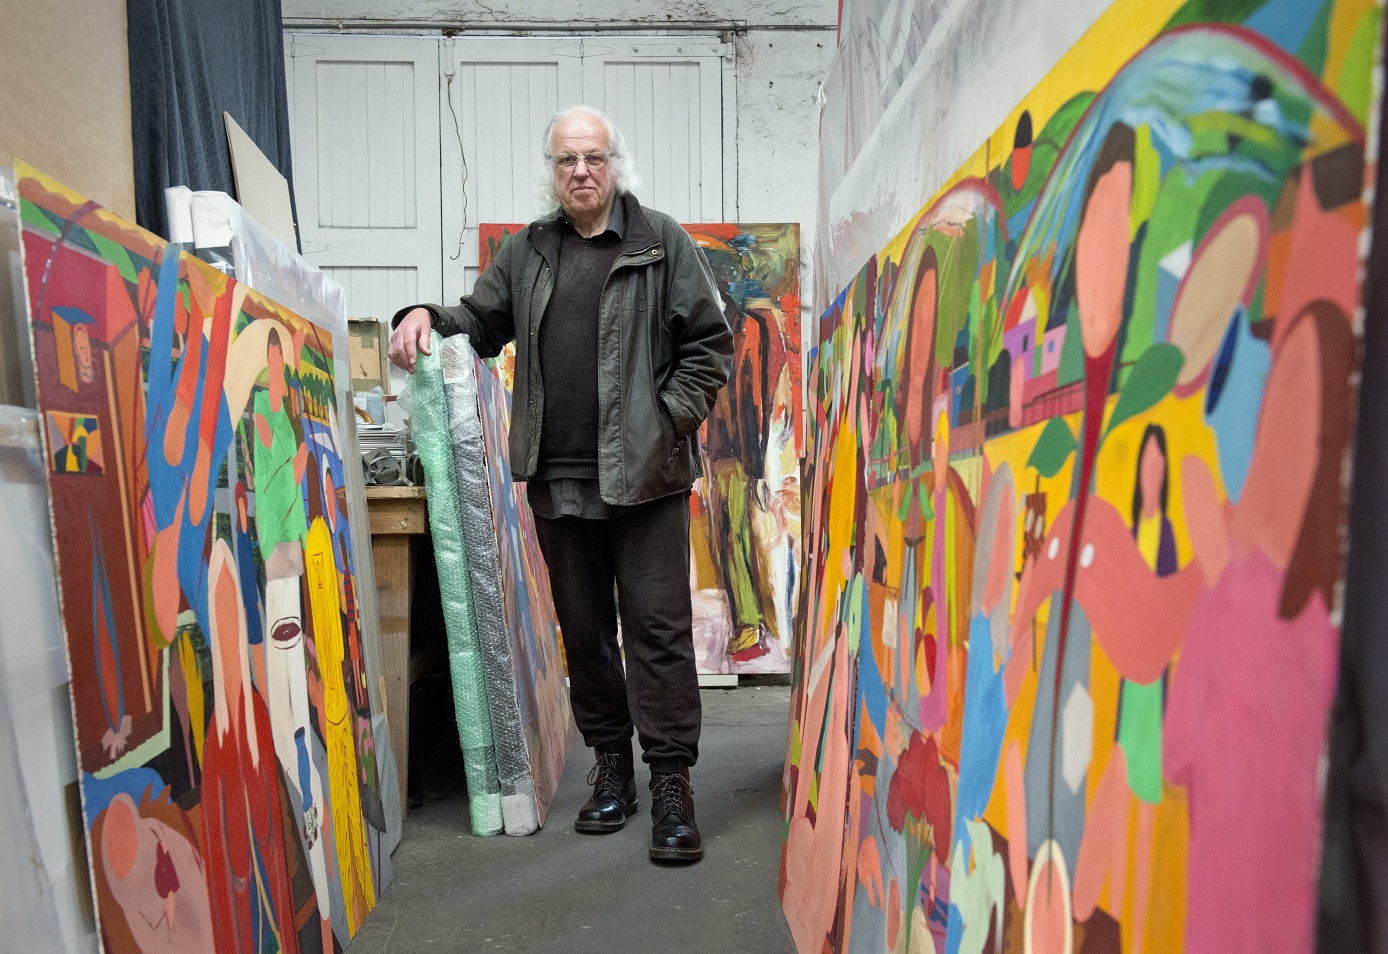 Jeffrey Harris is discovering what he has stored in his studio over the years. Photo: Gerard O'Brien